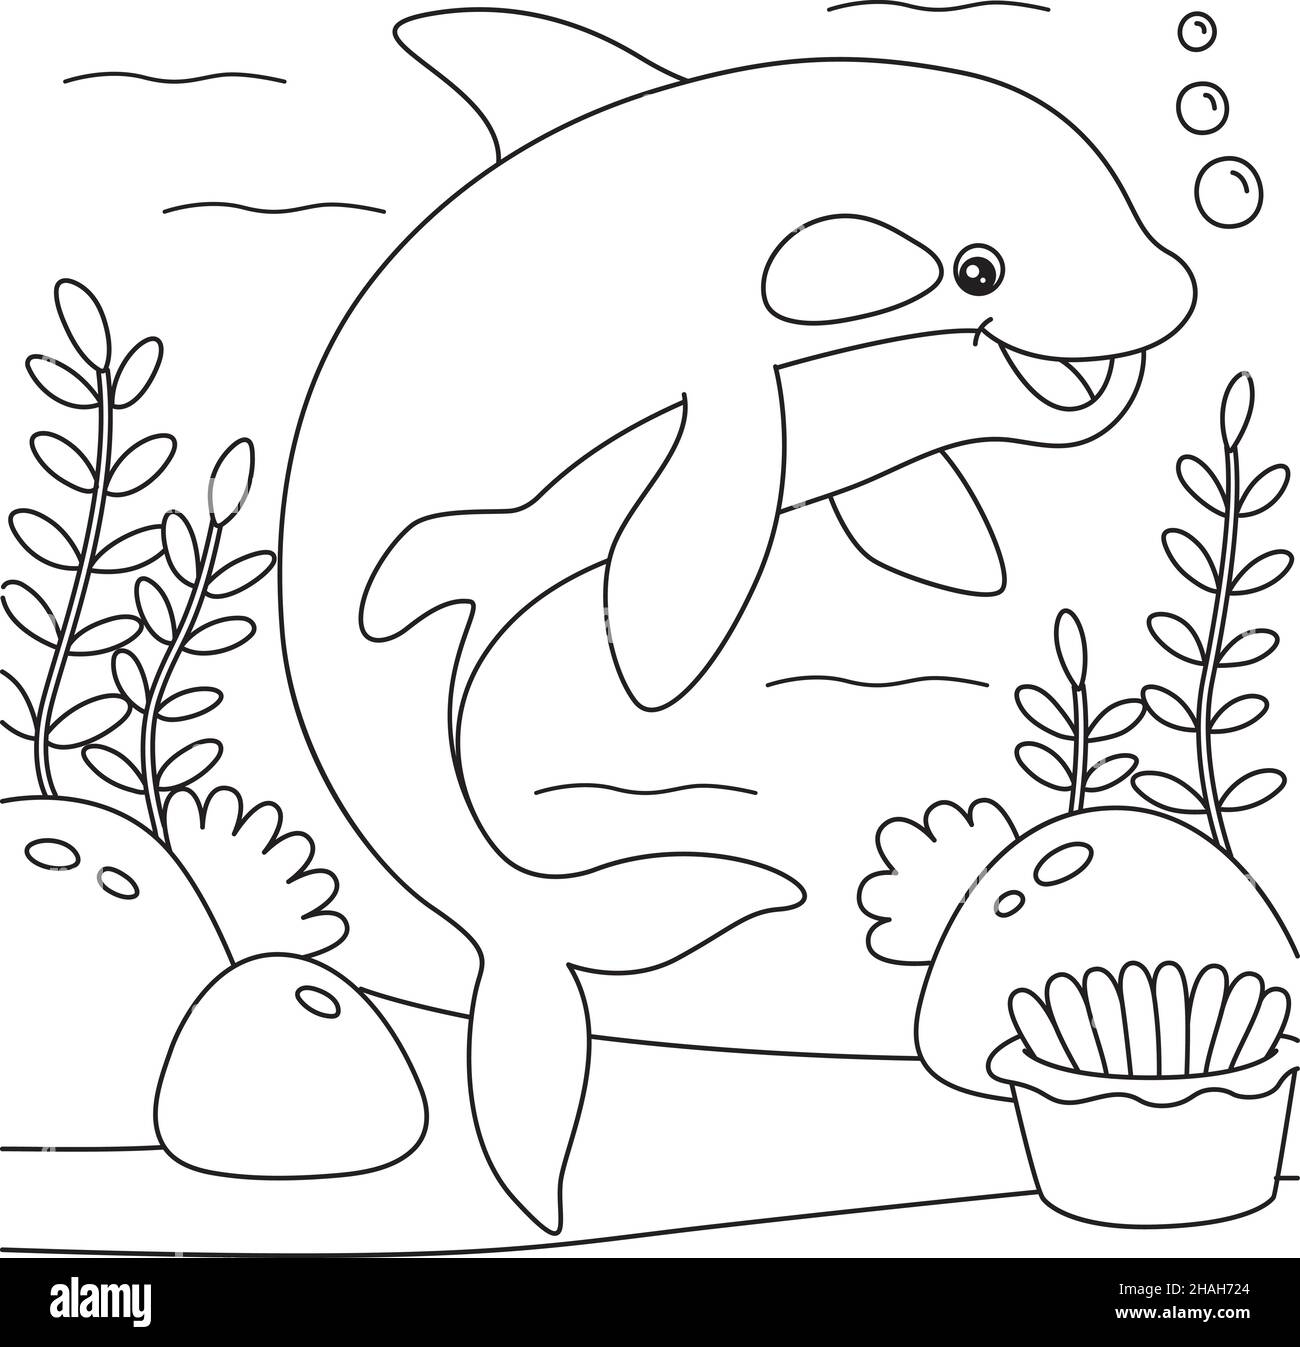 Killer Whale Coloring Page for Kids Stock Vector